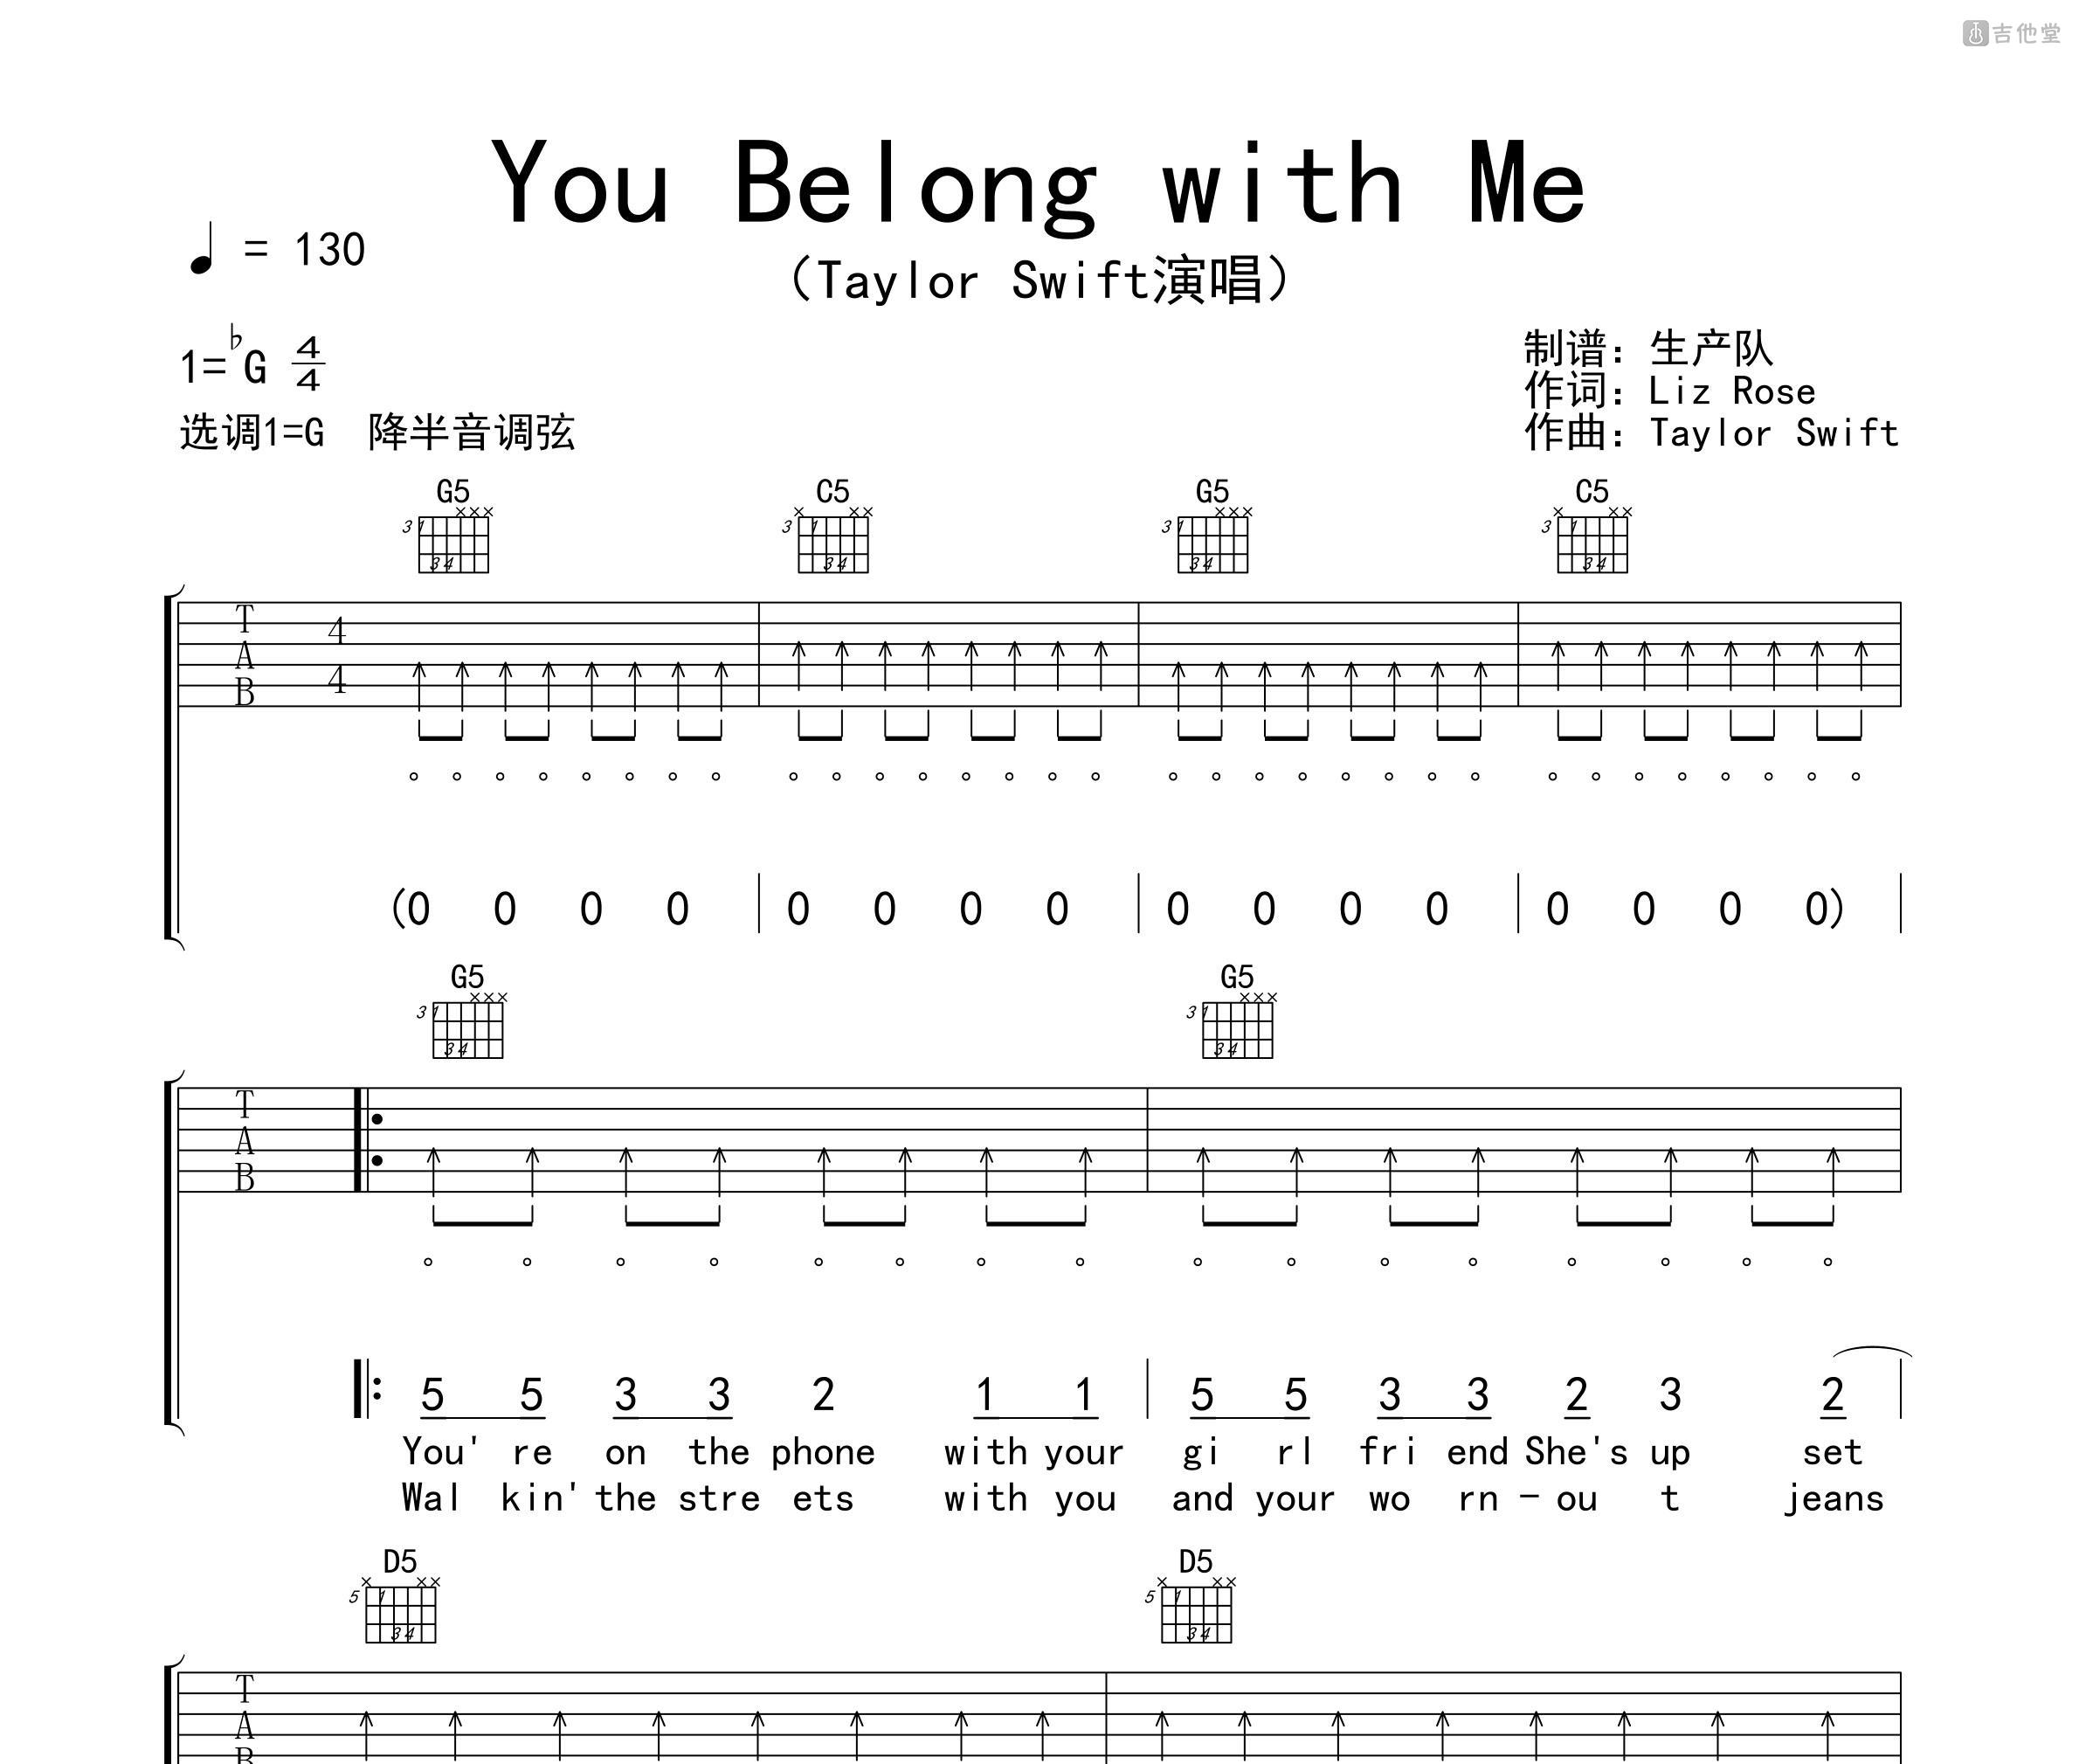 You Belong with Me吉他谱